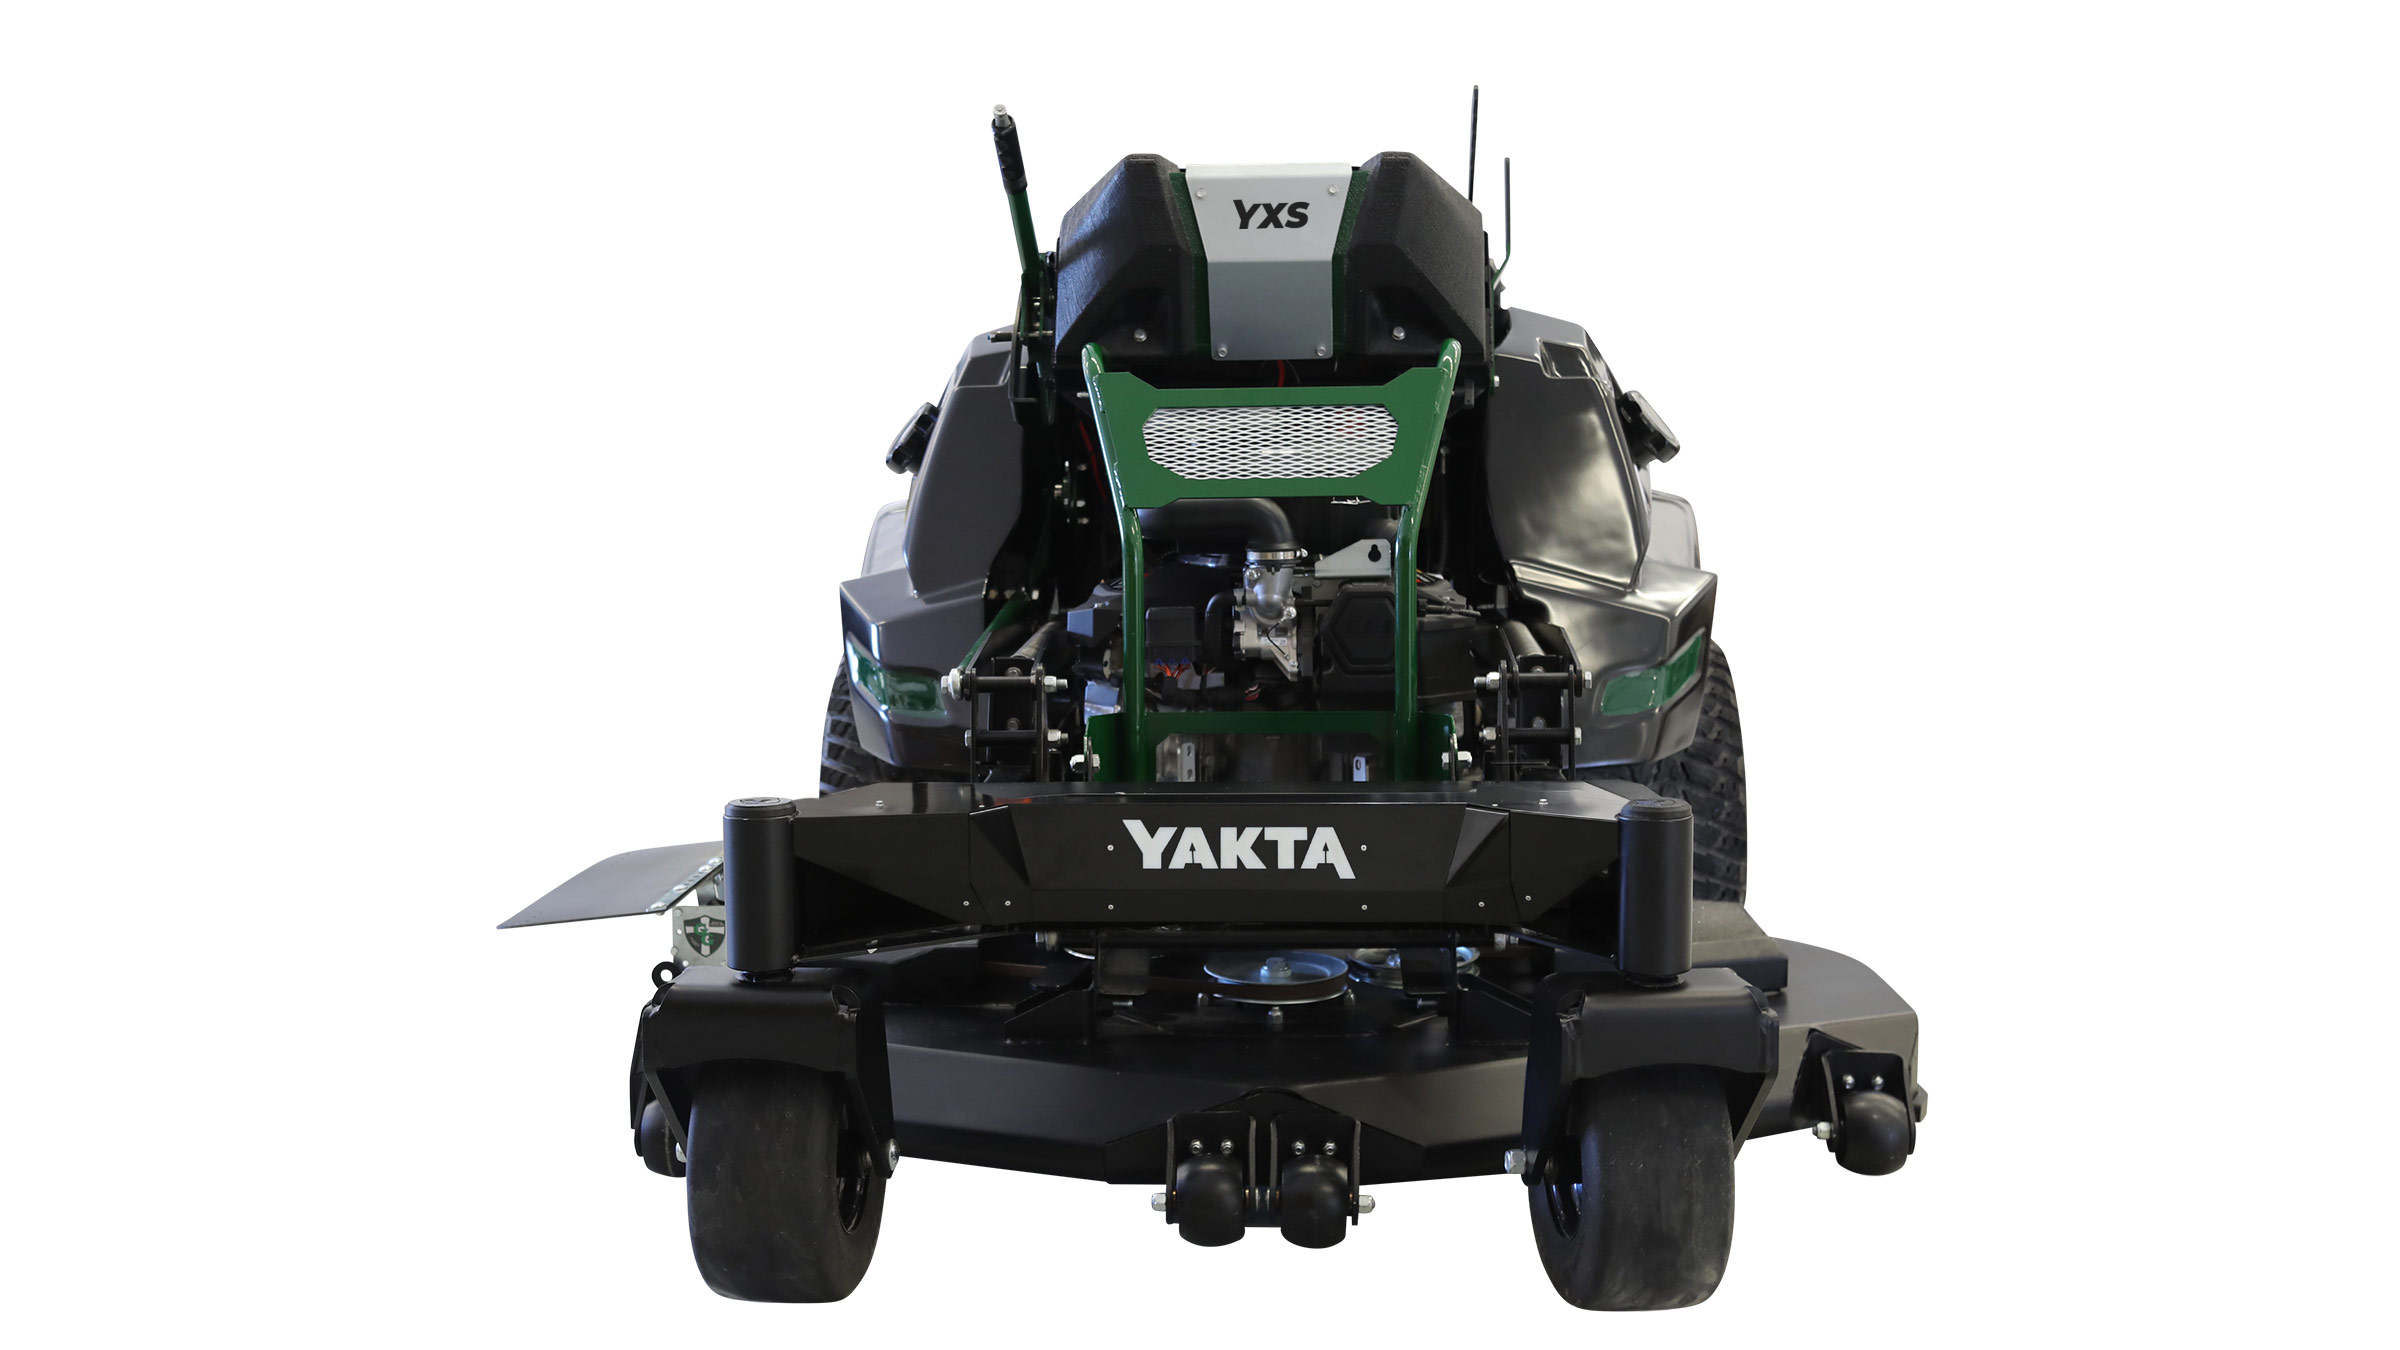 YXS 720 stand-on mower front